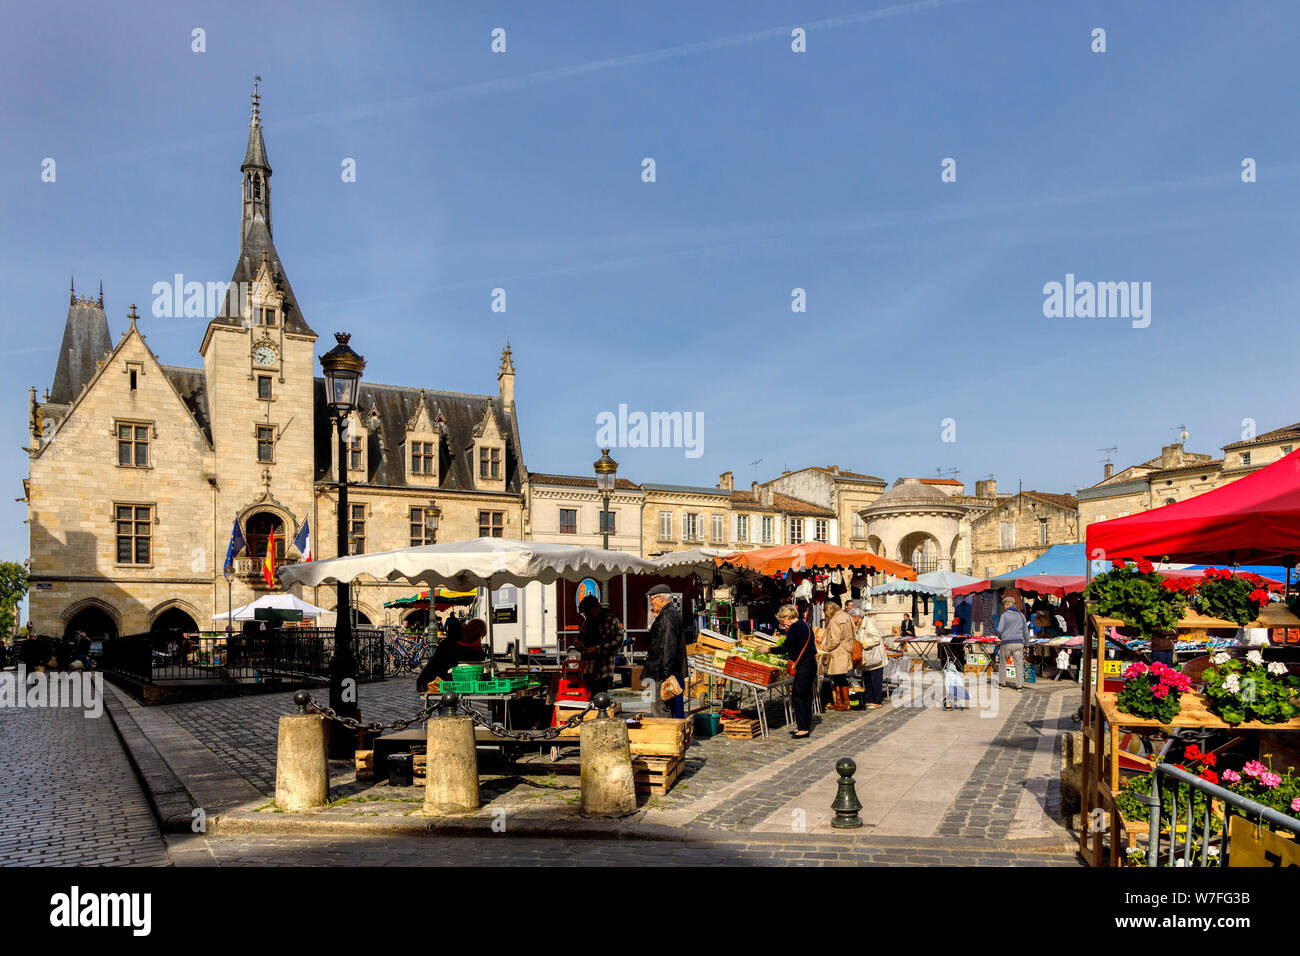 Libourne market square with the 1914 Neo-Gothic Town Hall in the background, Near Bordeaux, Gironde department, France. Stock Photo